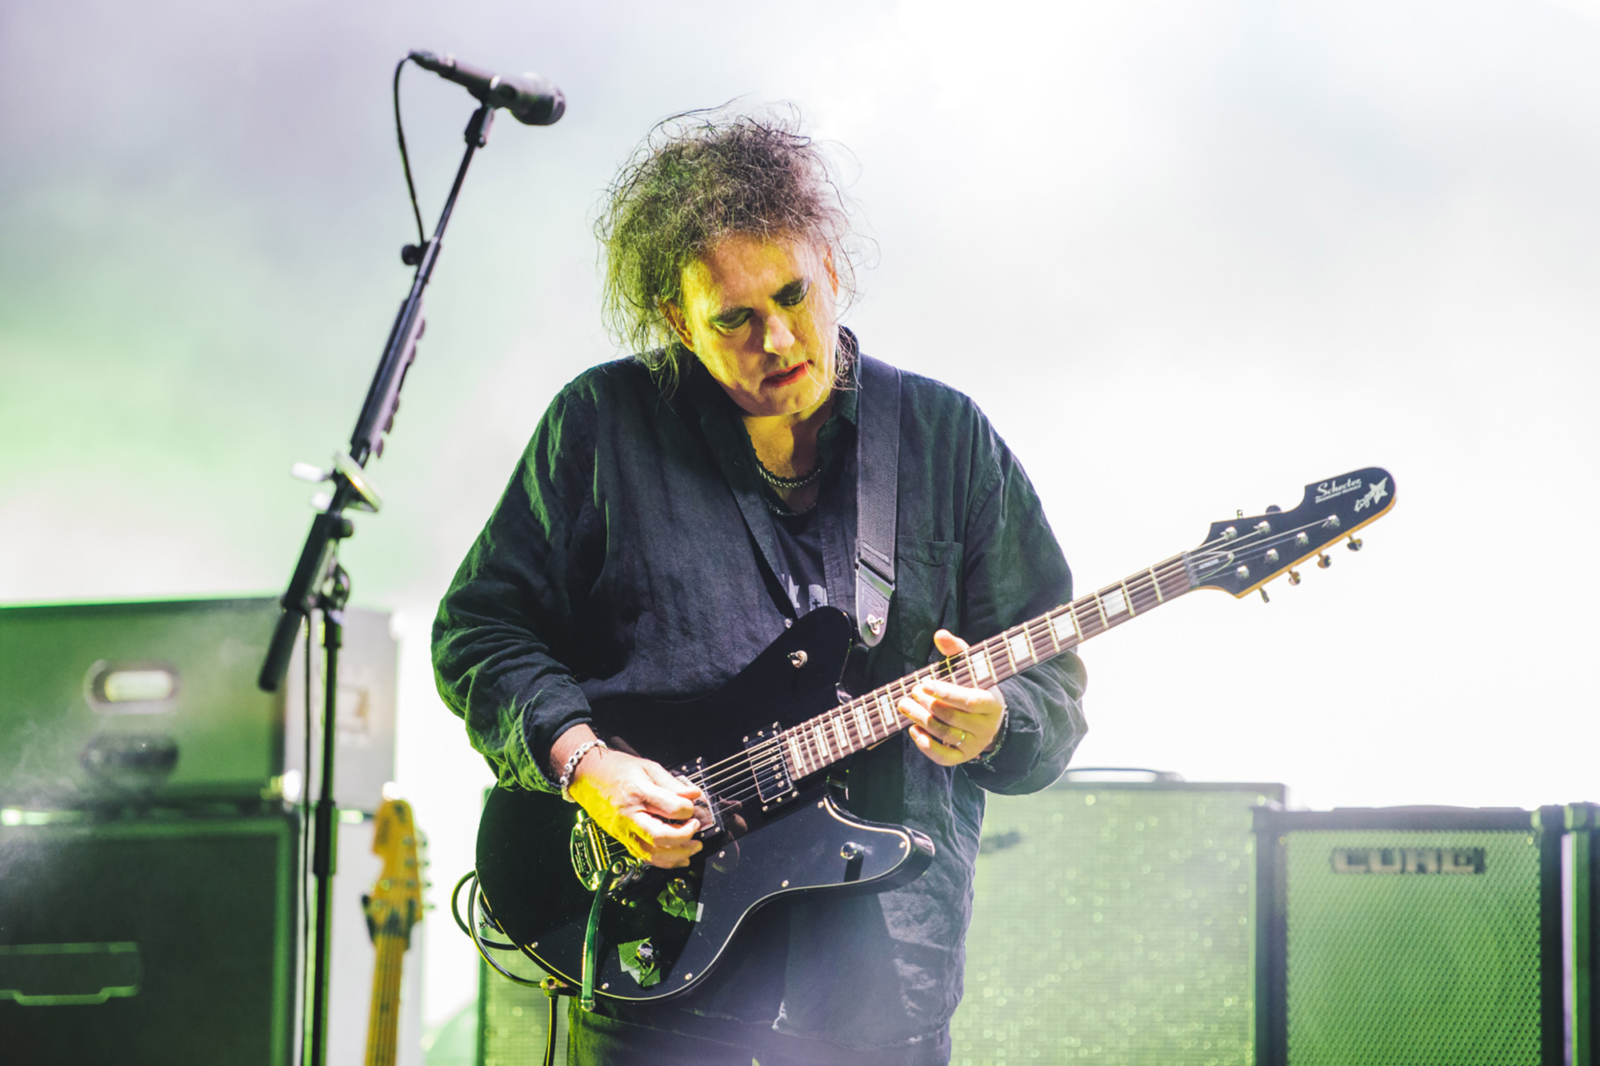 The Cure, Tame Impala, Robyn, Father John Misty and more announced as first artists for Flow Festival 2019